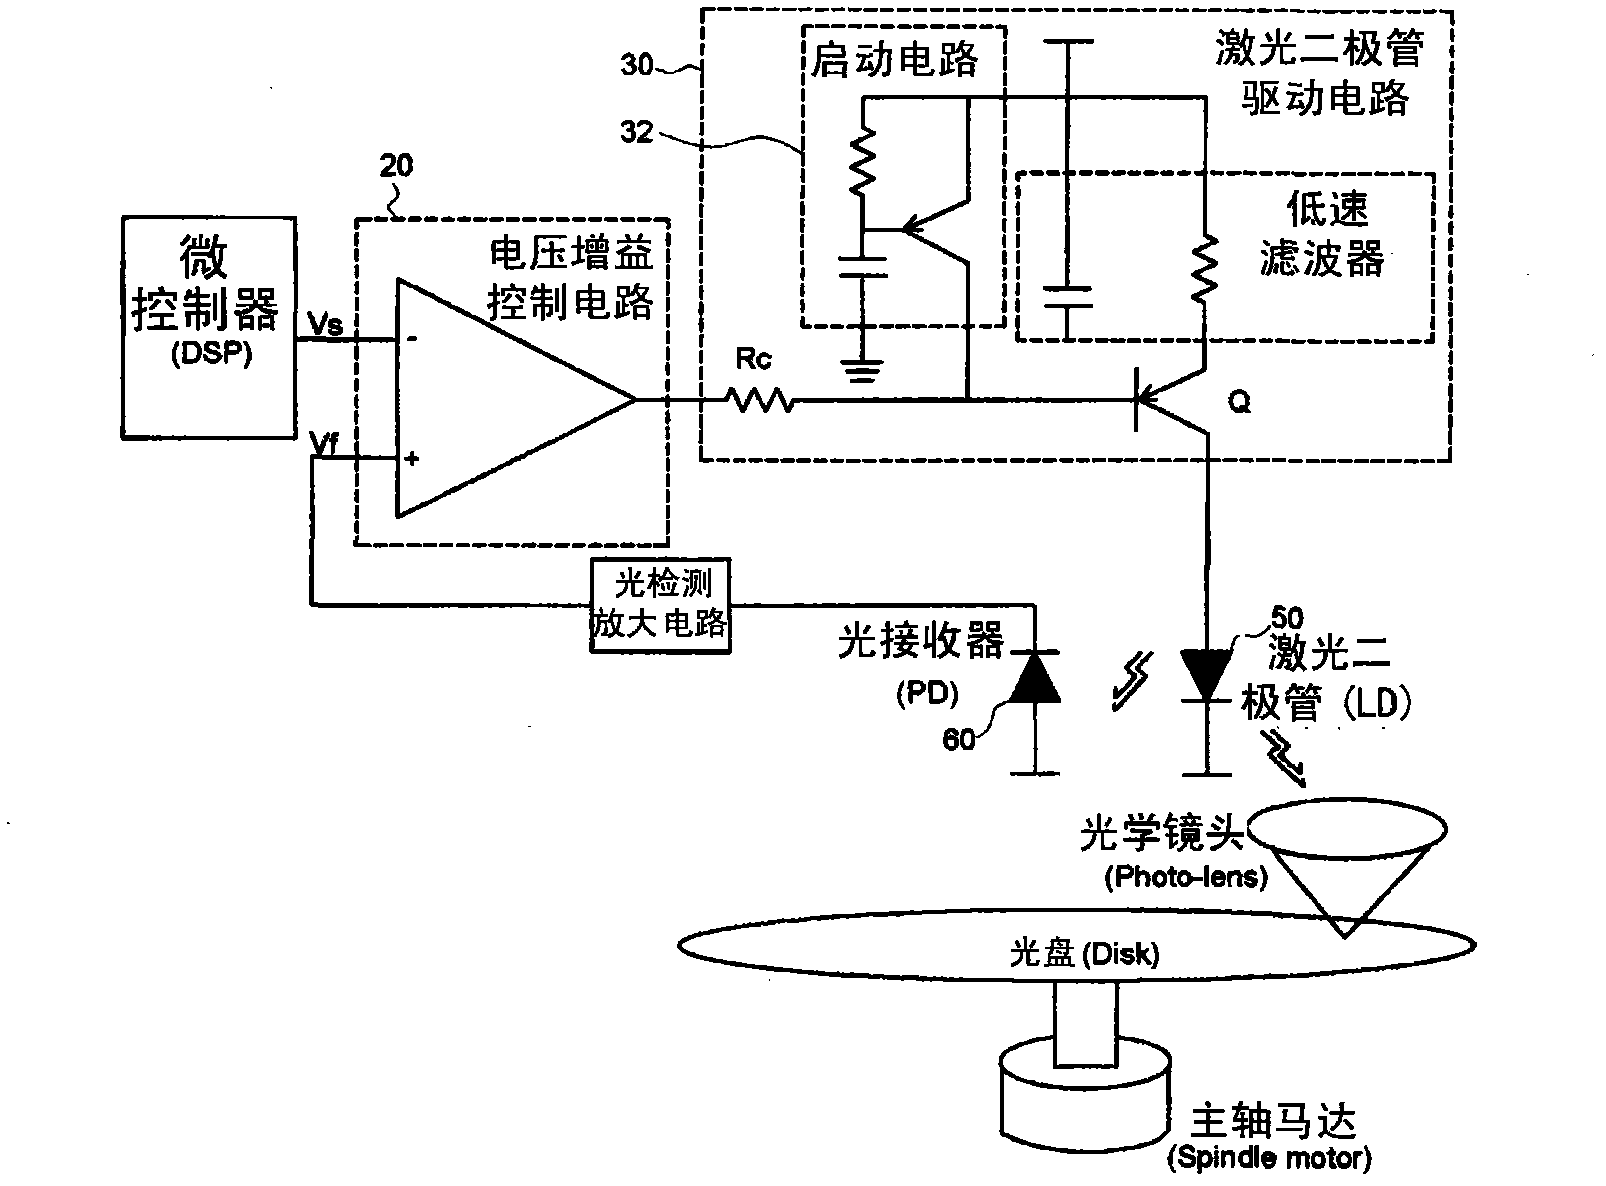 Laser diode control device with good stability